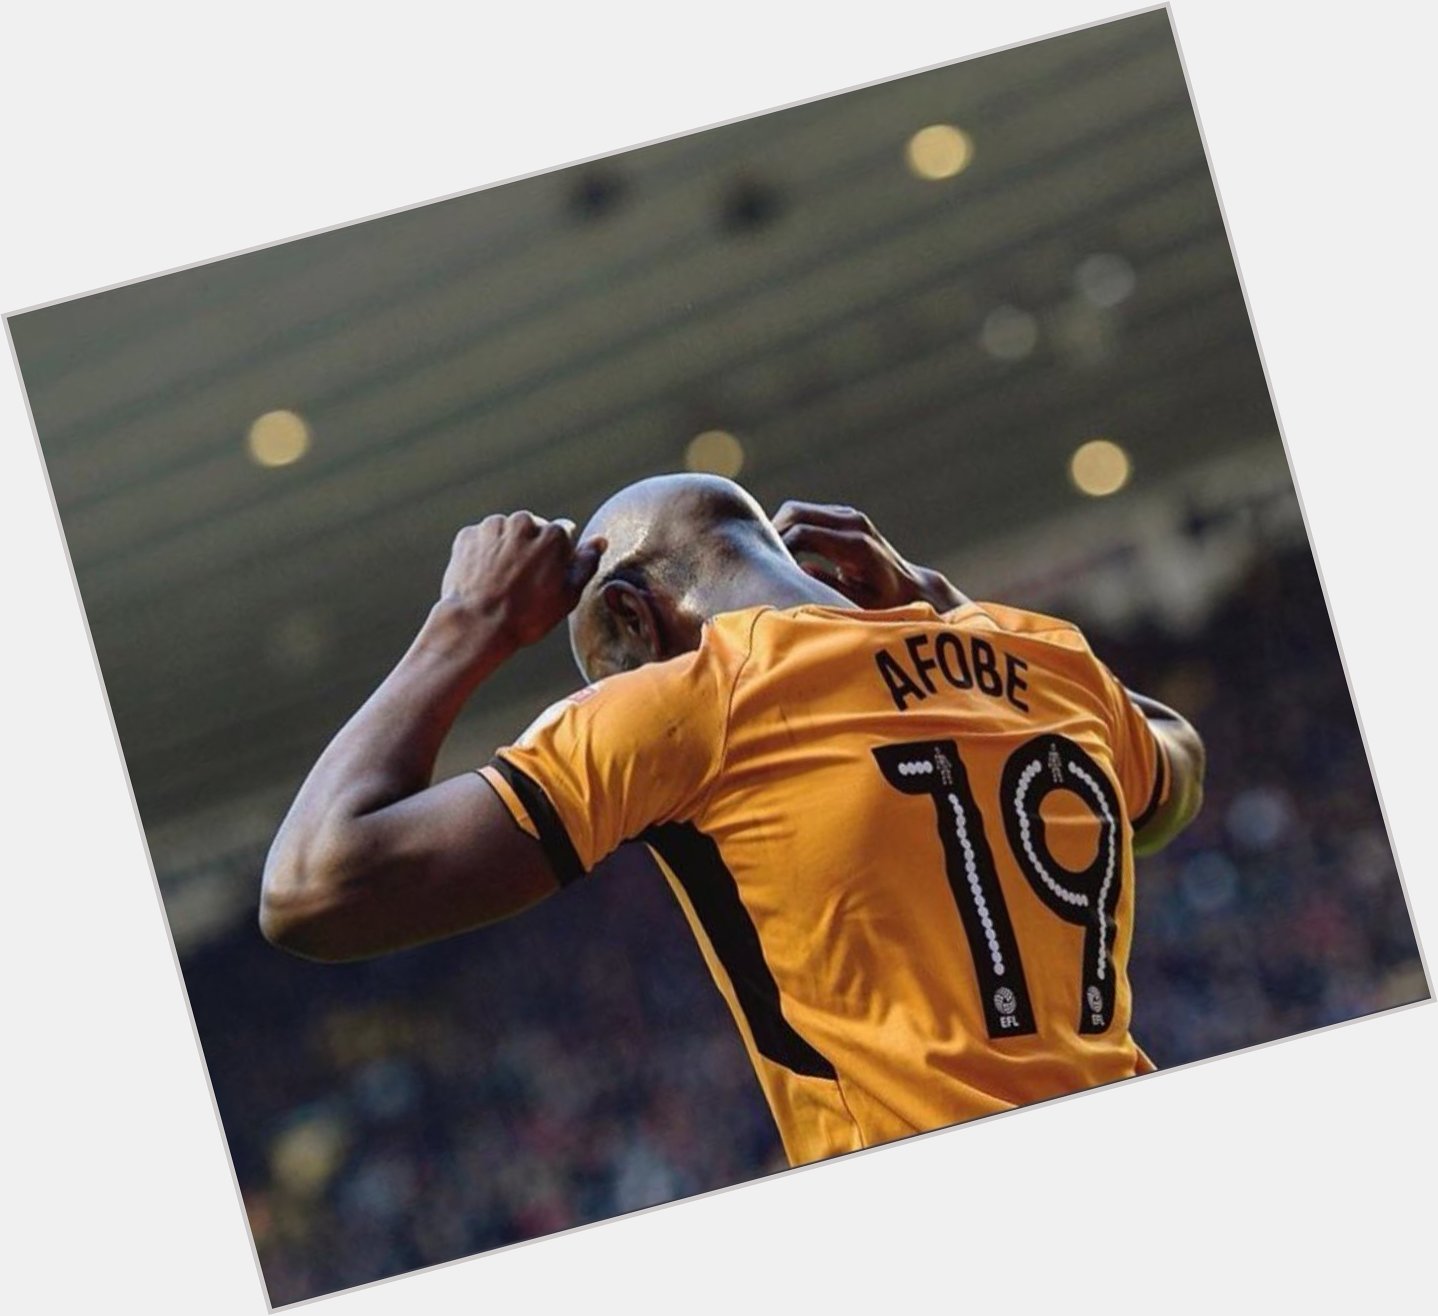 Happy Birthday to our founder Benik Afobe, who turns 25 today   